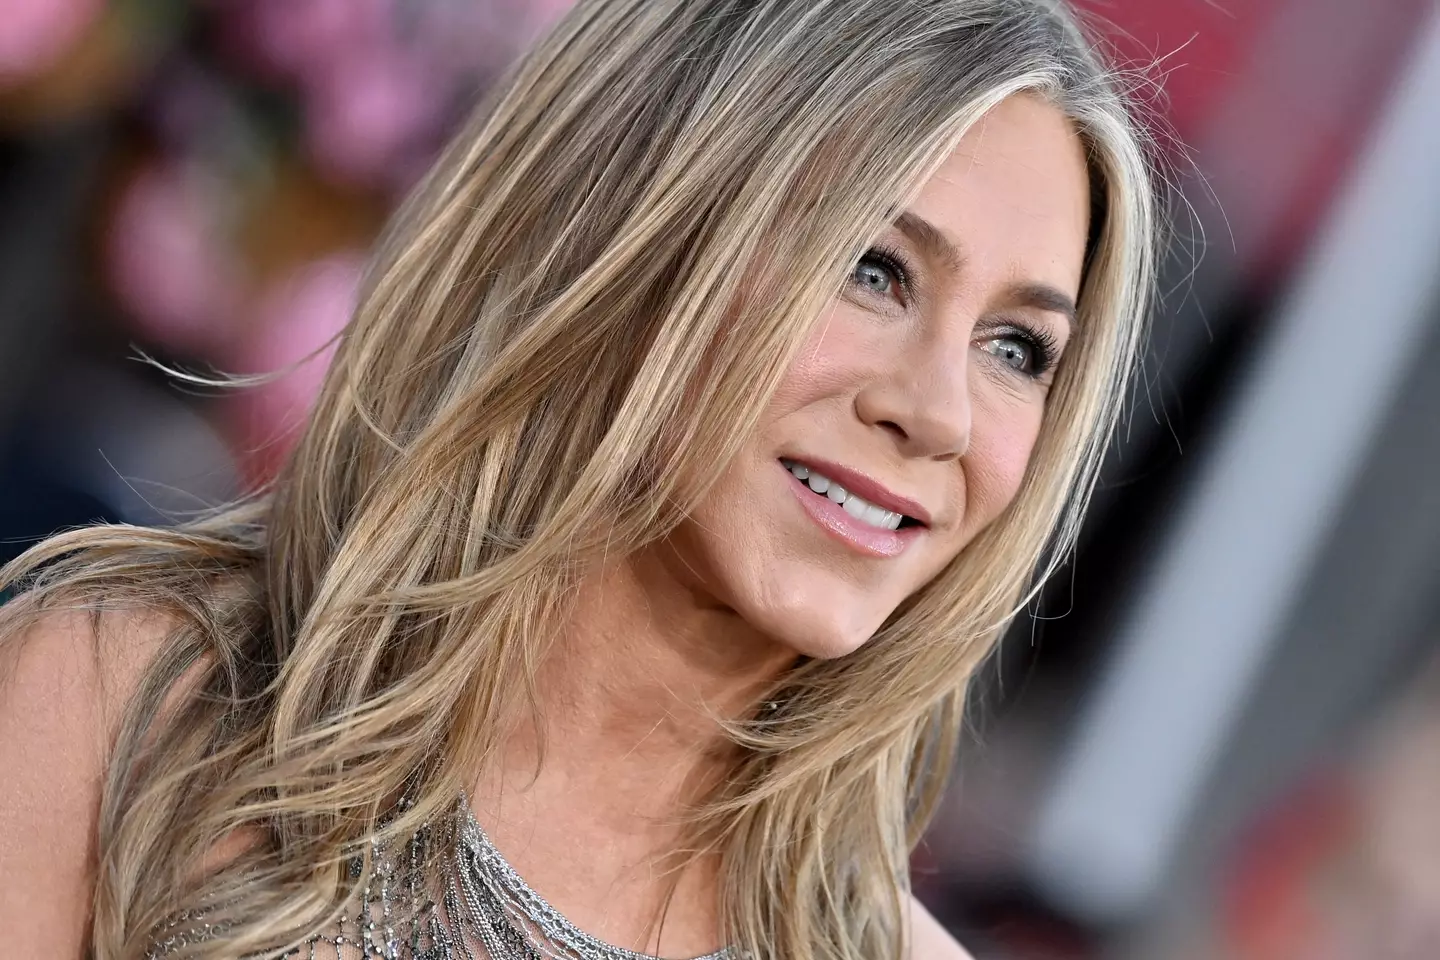 Jennifer Aniston is now 54 years old.